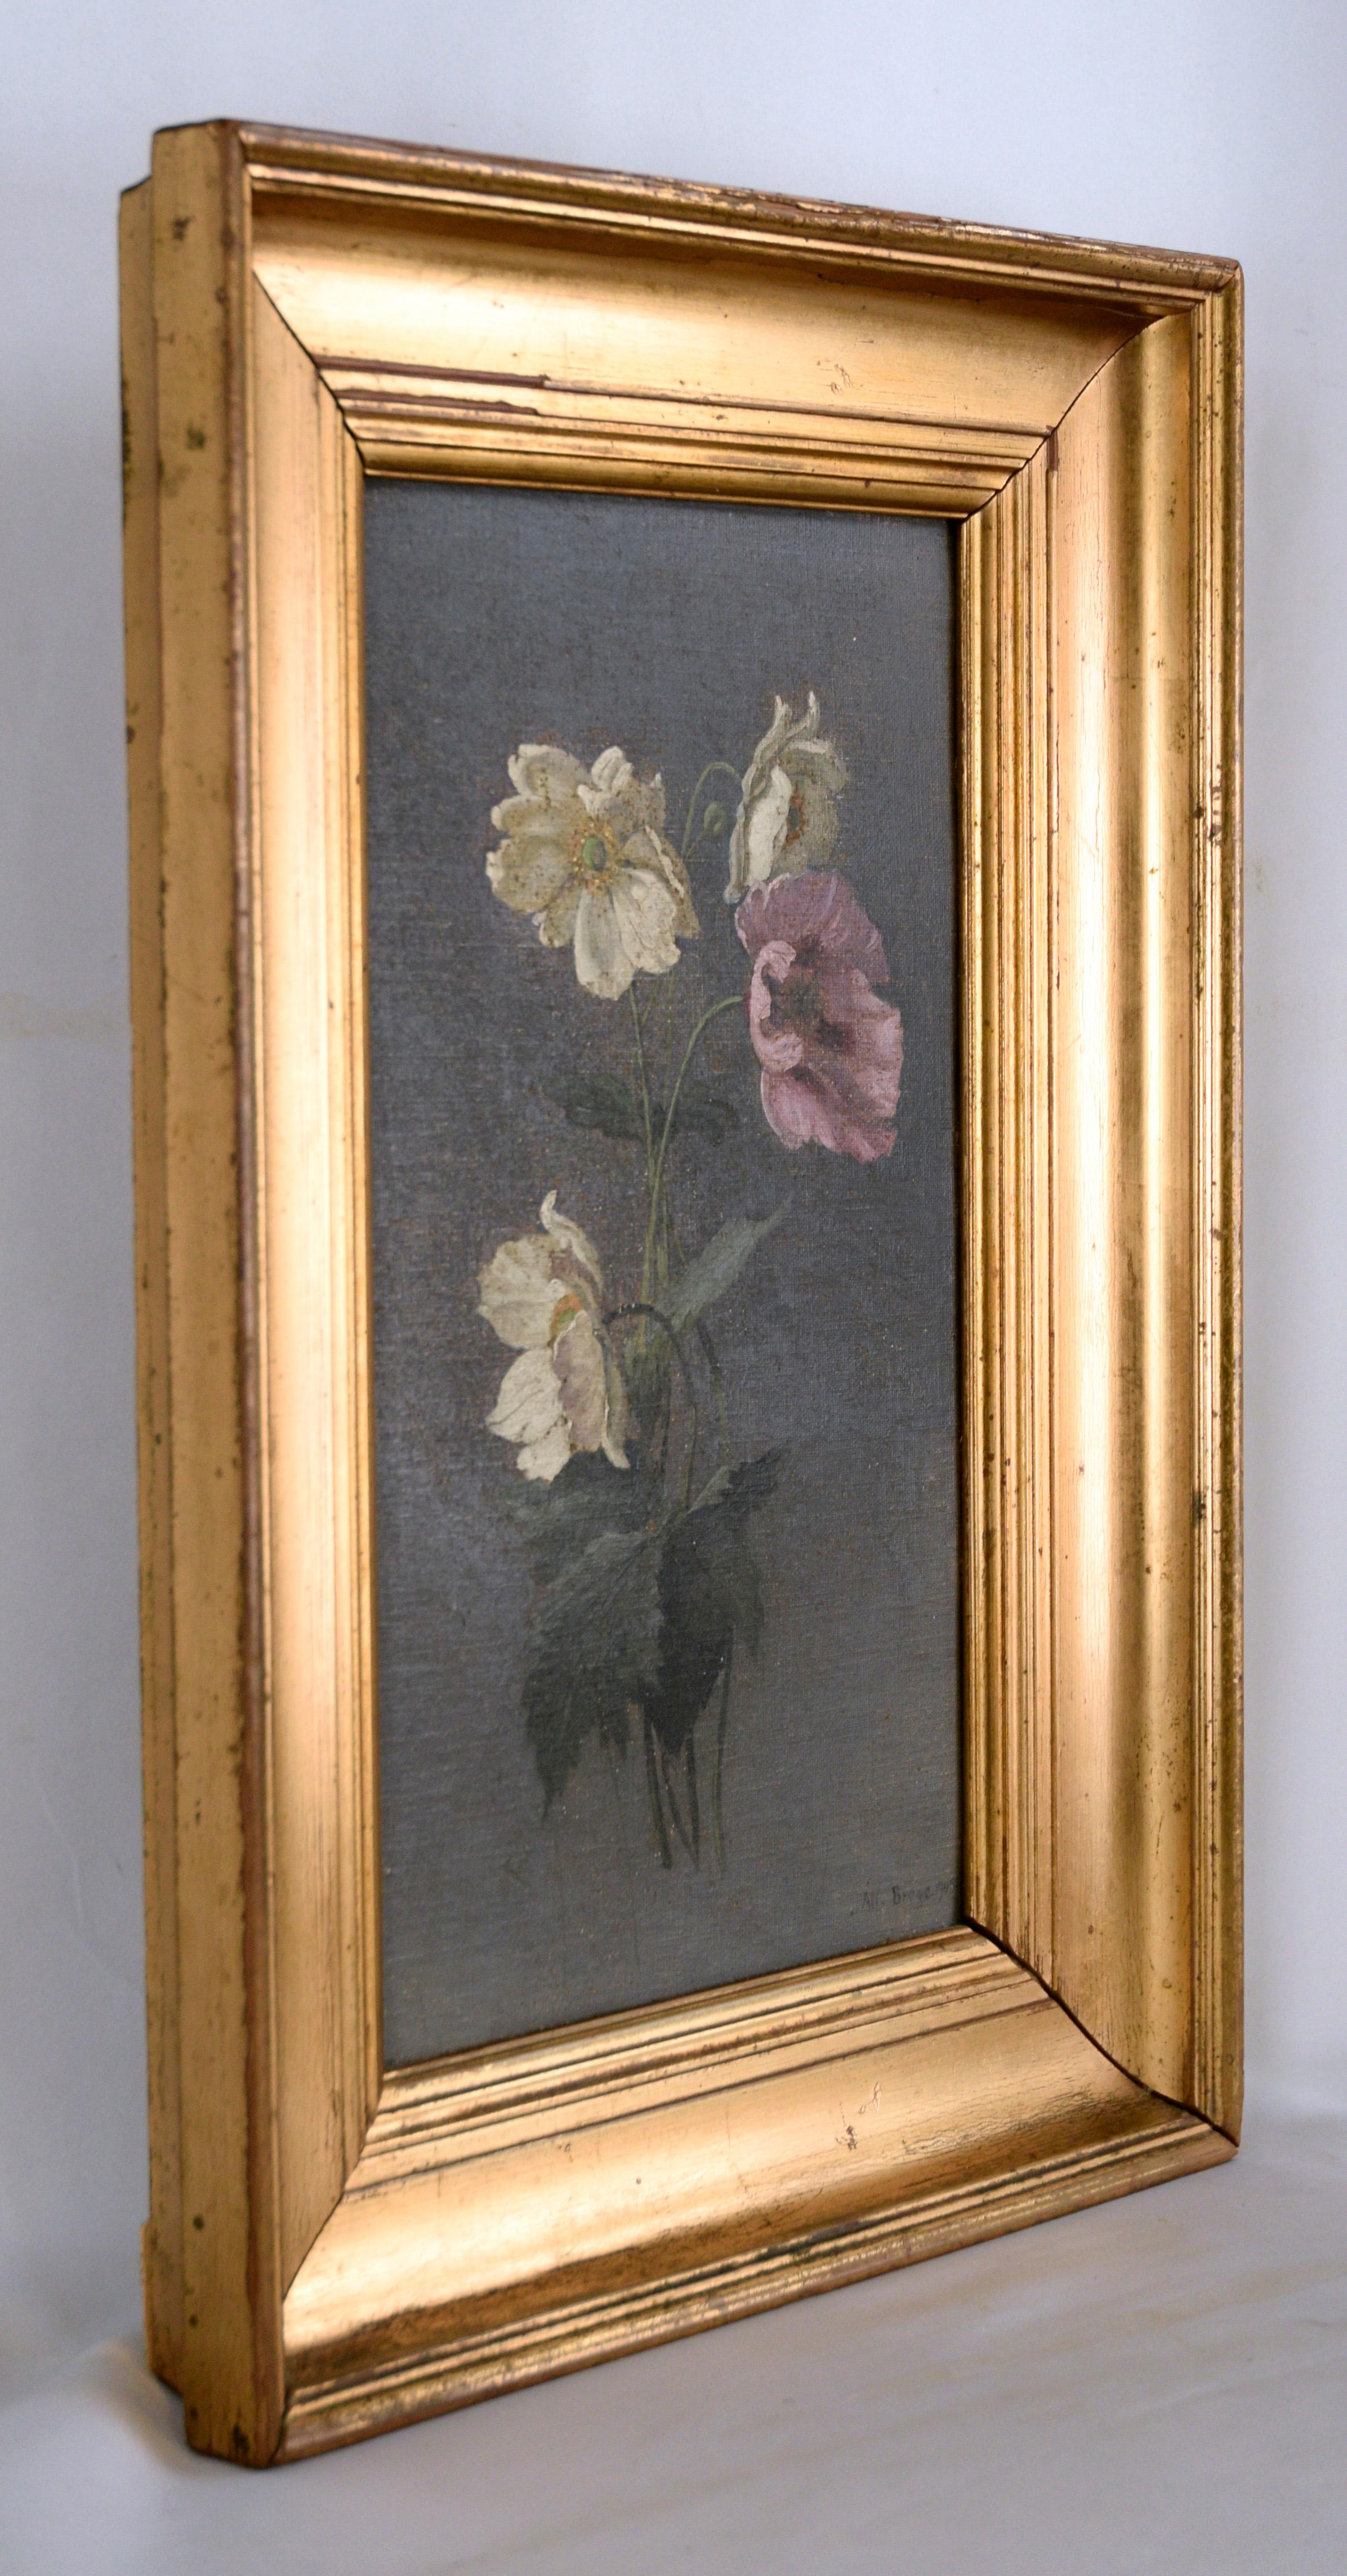 Poppy and Anemone Still Life Floral Study in Oil on Linen For Sale 1